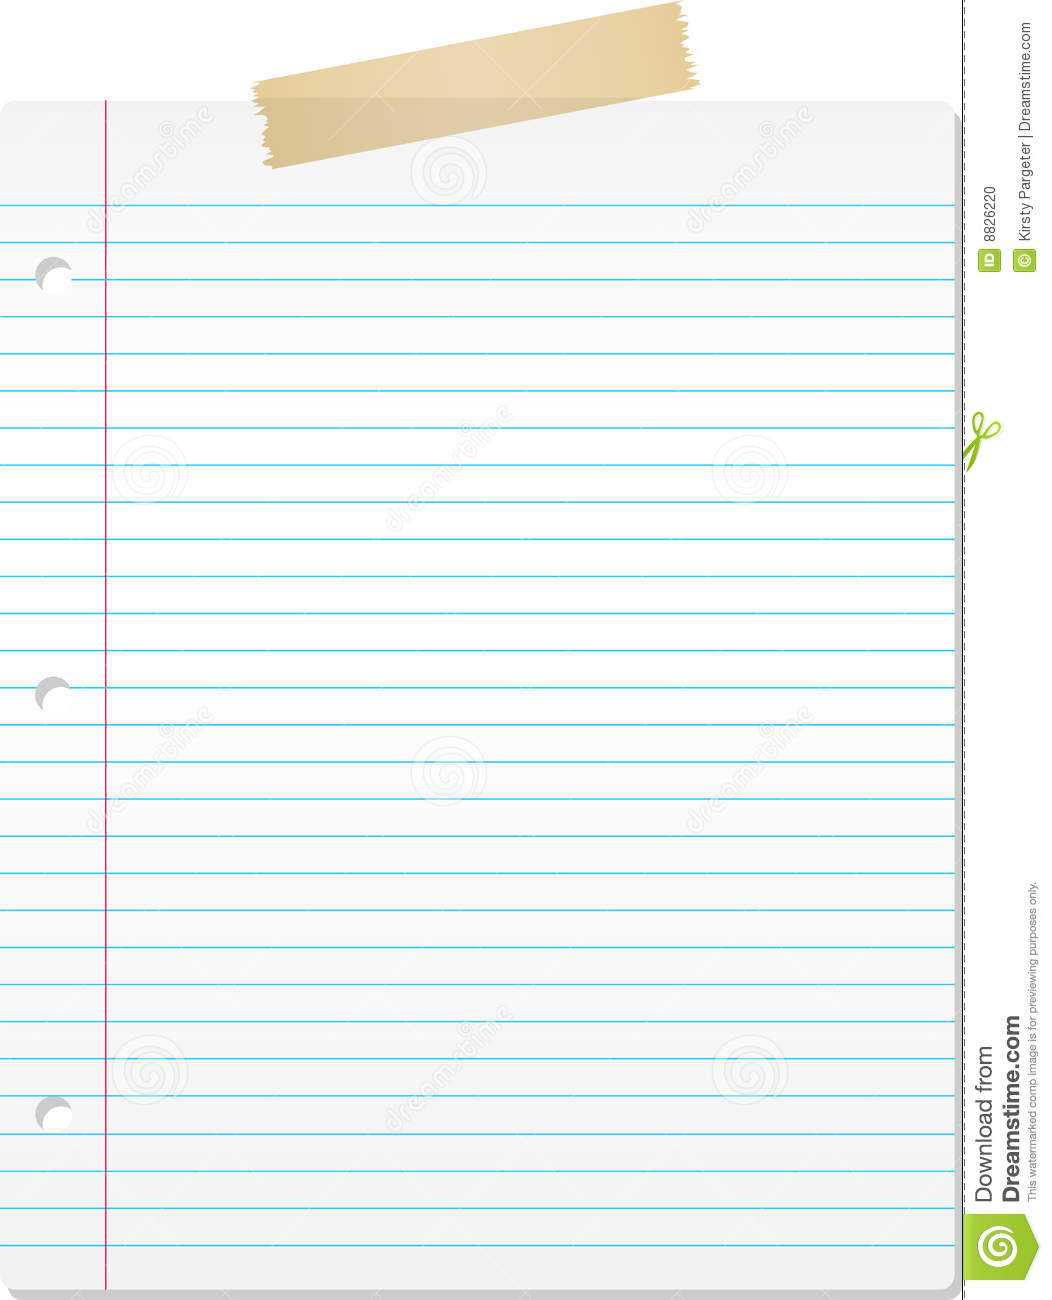 Lined Paper Stock Vector. Illustration Of Supplies, Masking Throughout Microsoft Word Lined Paper Template